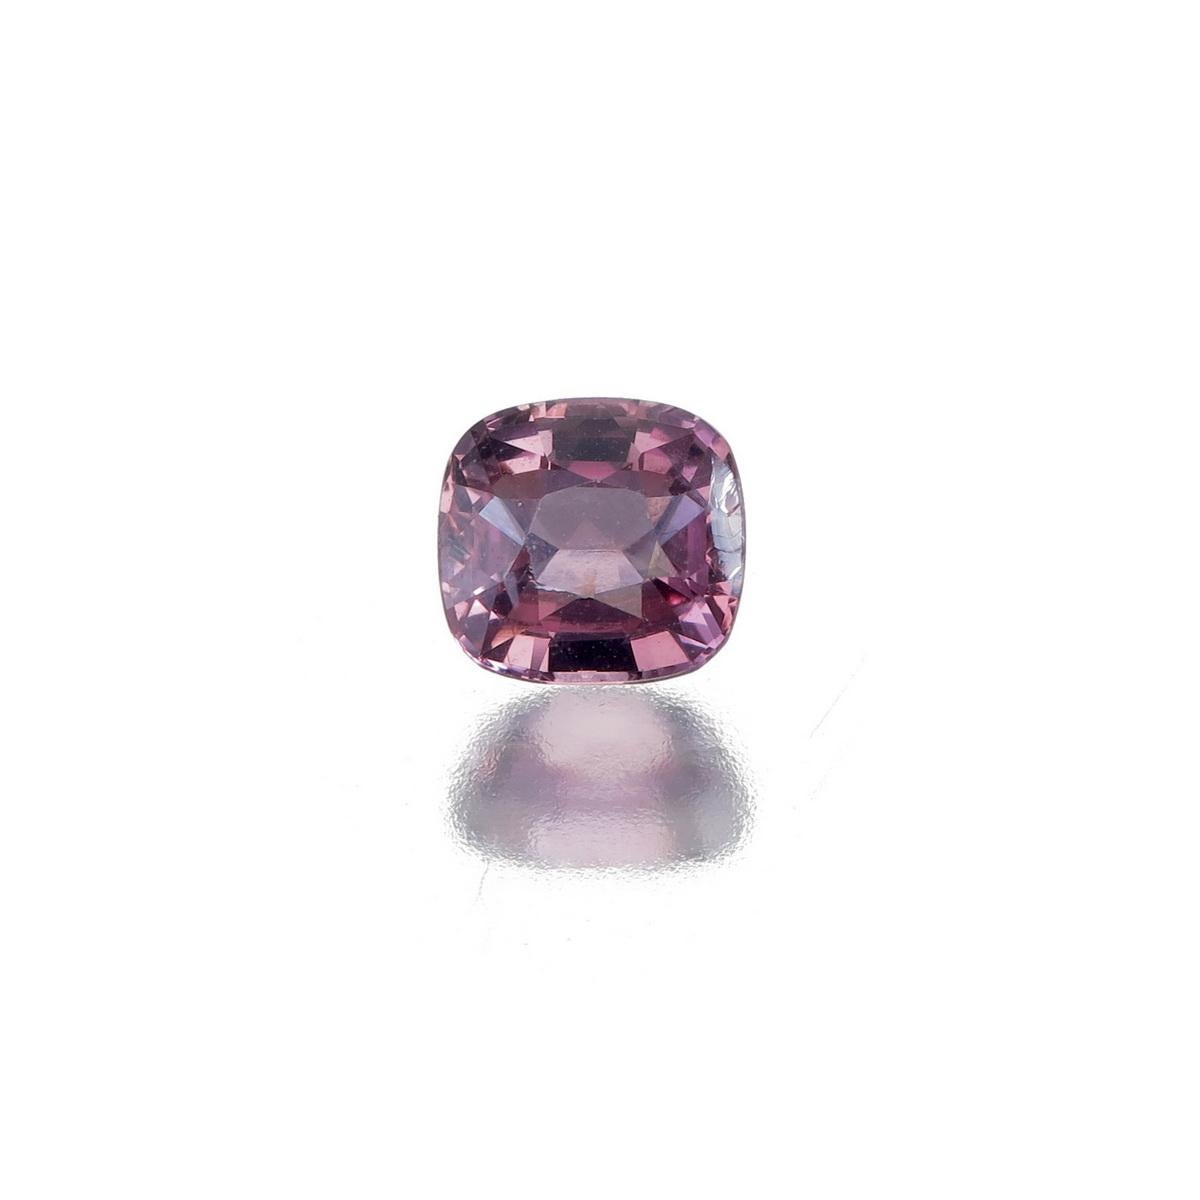 Women's 1.16 Carat Natural Pink Spinel from Burma No Heat For Sale